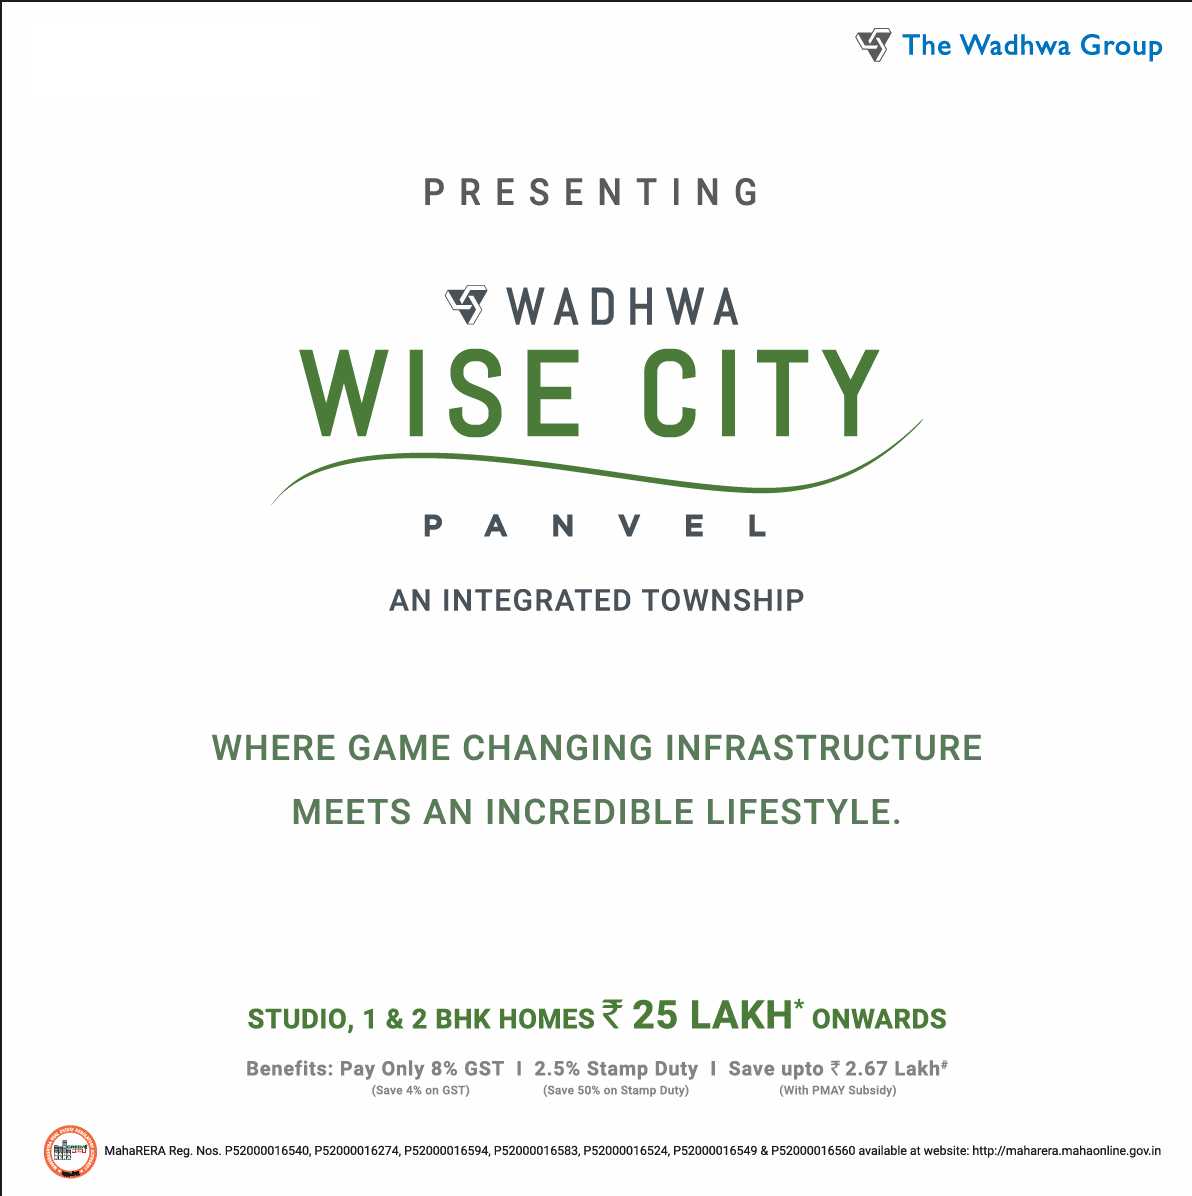 Save up to Rs. 2.67 Lakh by booking your home at Wadhwa Wise City in Navi Mumbai